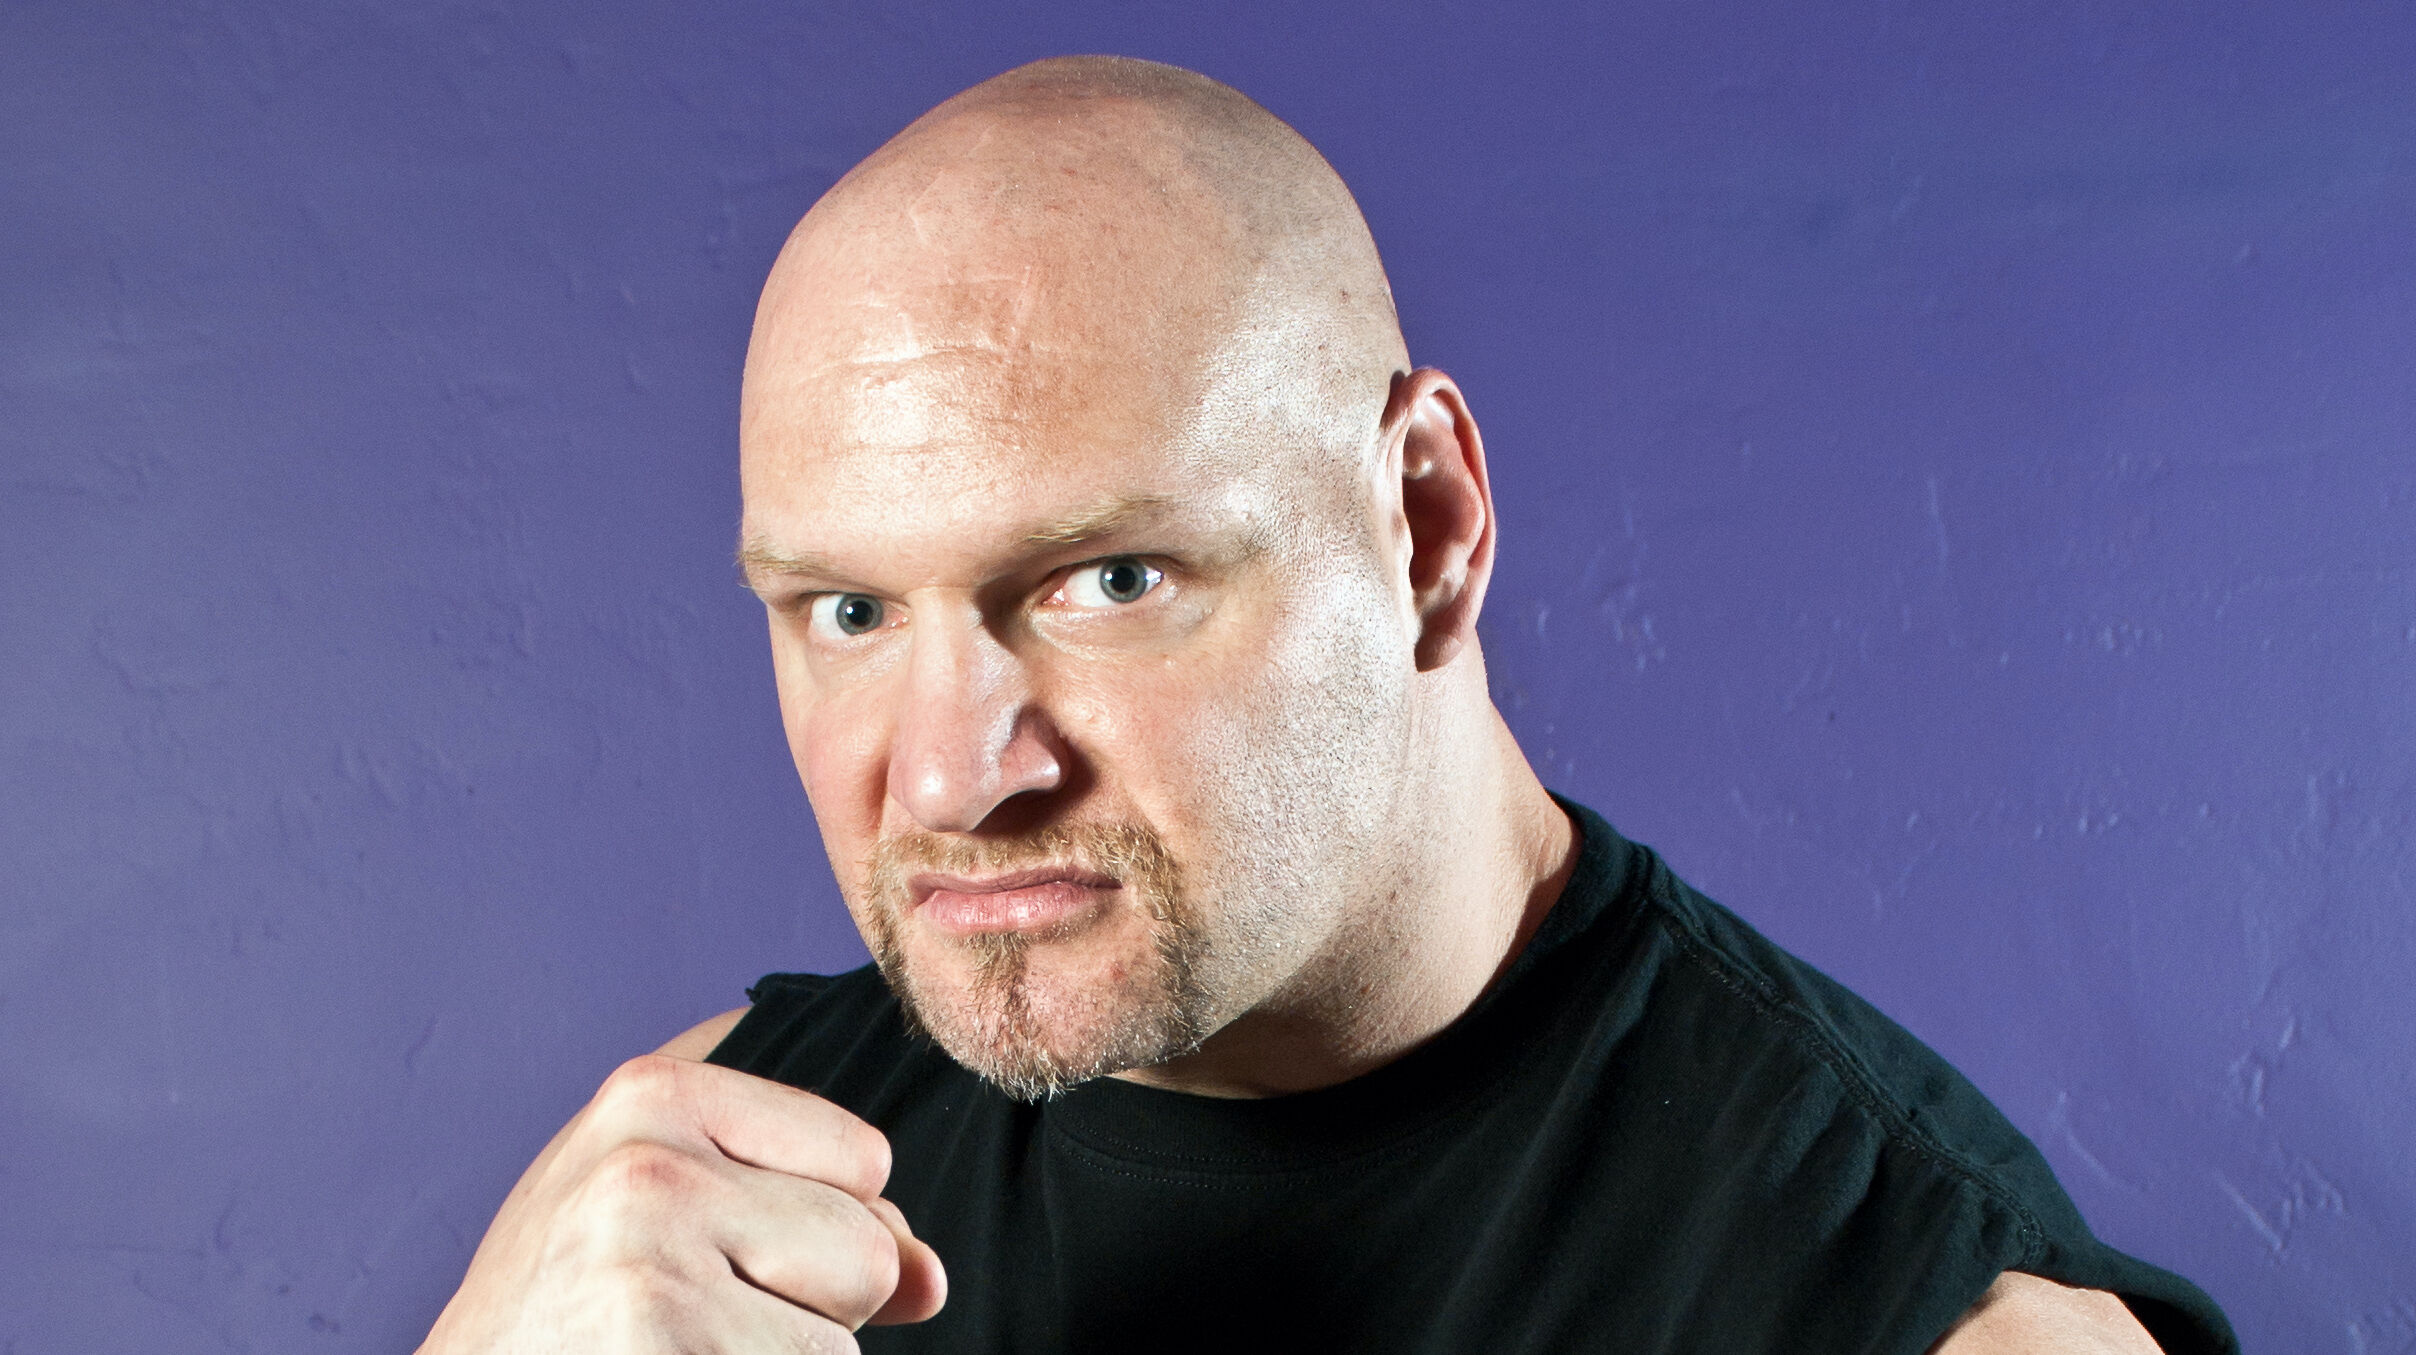 Val Venis is a bald white guy with a goatee. In this pic, he makes a fist and wears a black t-shirt while sneering against a purple background